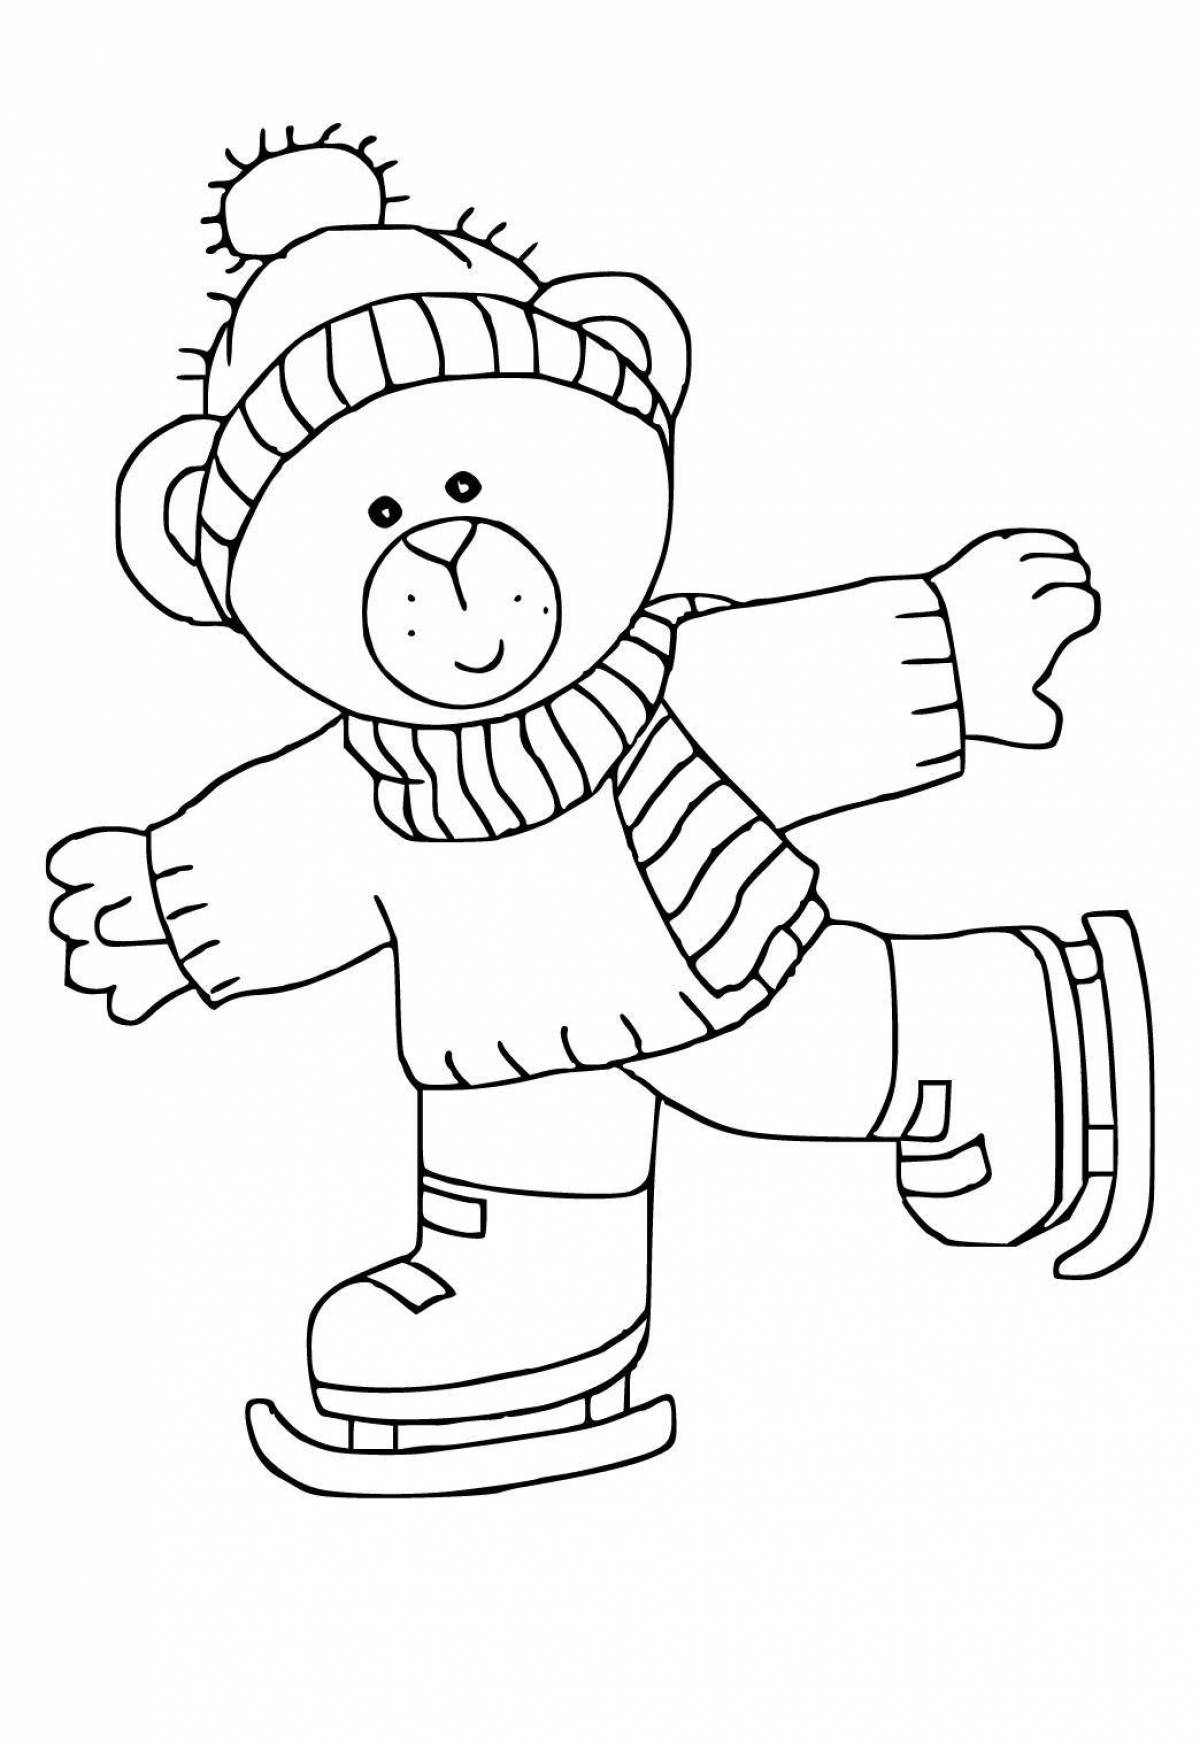 Playful winter coloring book for 3 year olds